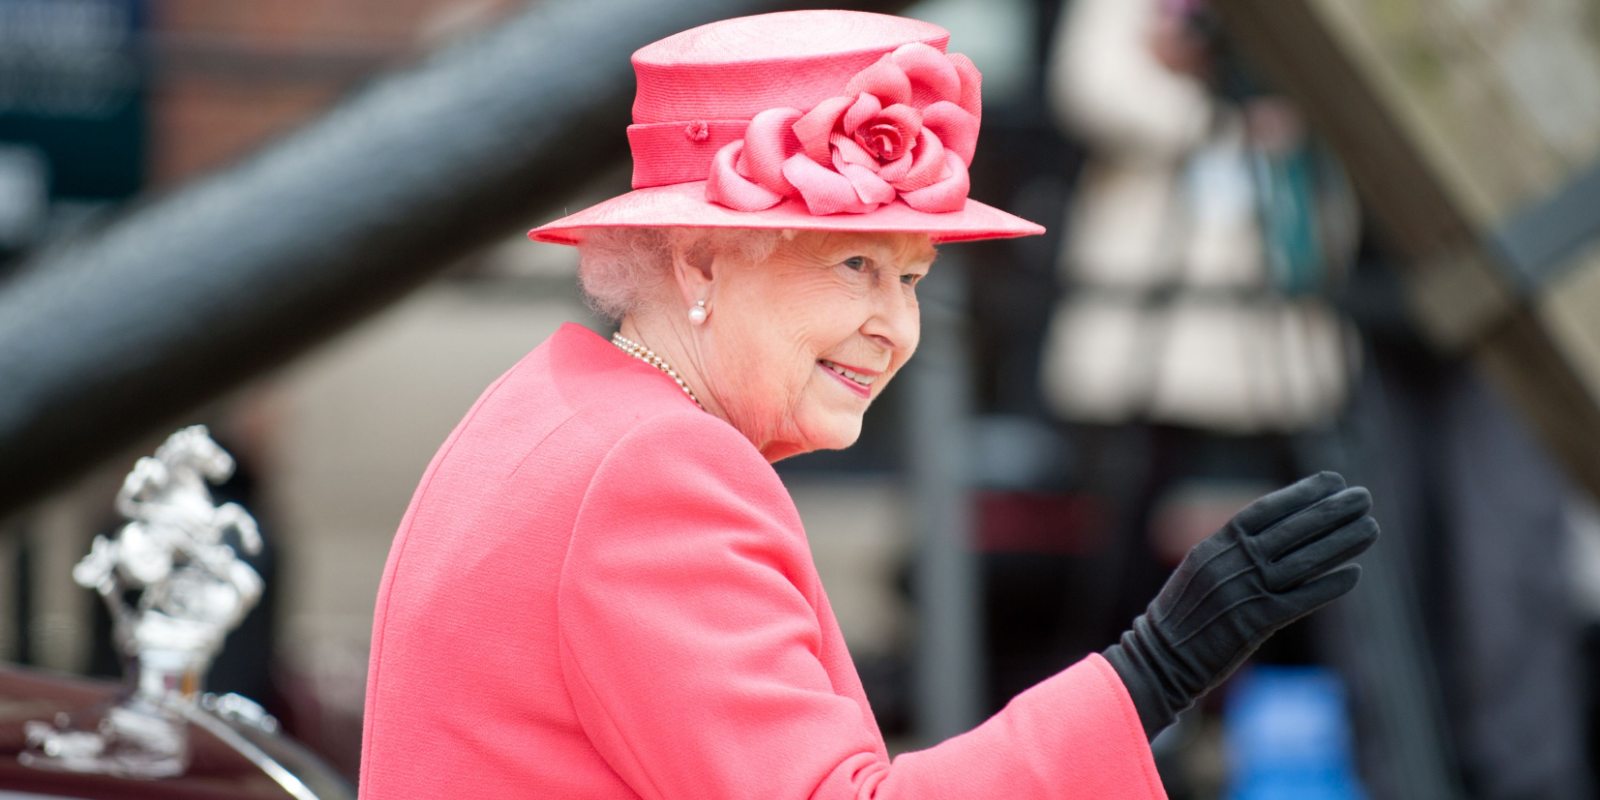 Queen Elizabeth II's reign comes to an end after 70 years